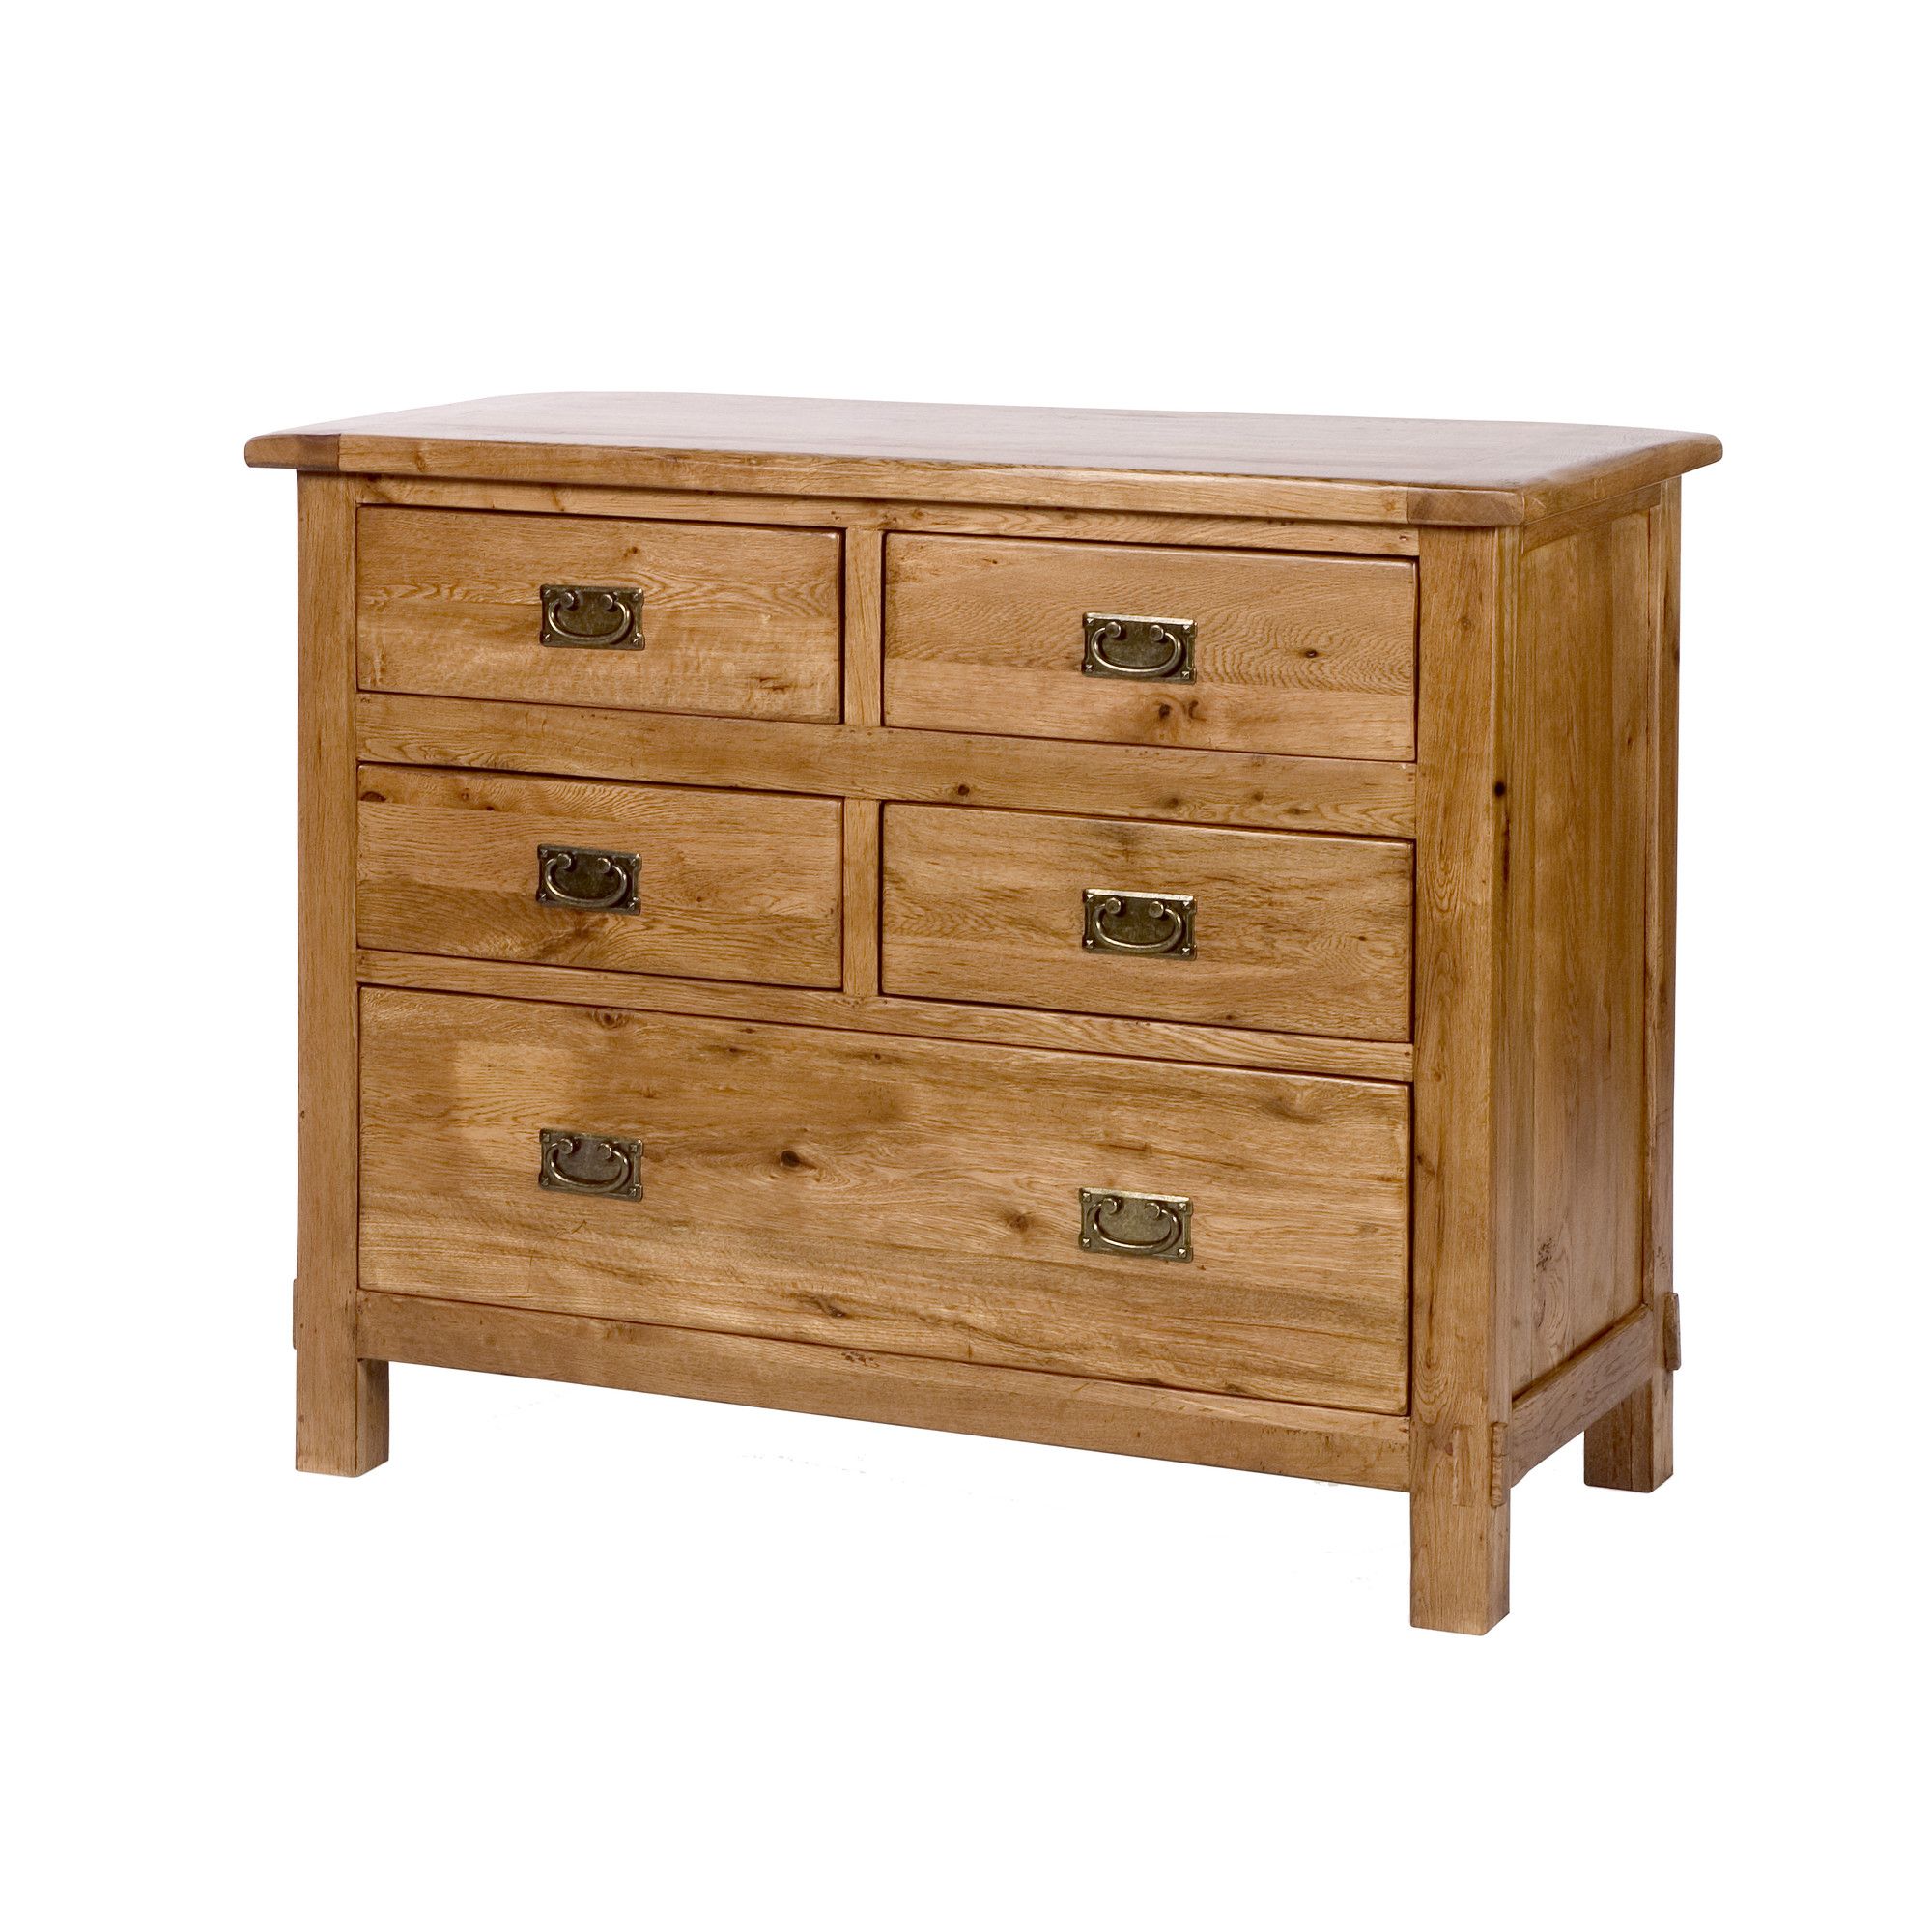 Wiseaction Riviera 4 Over 1 Drawer Chest at Tesco Direct